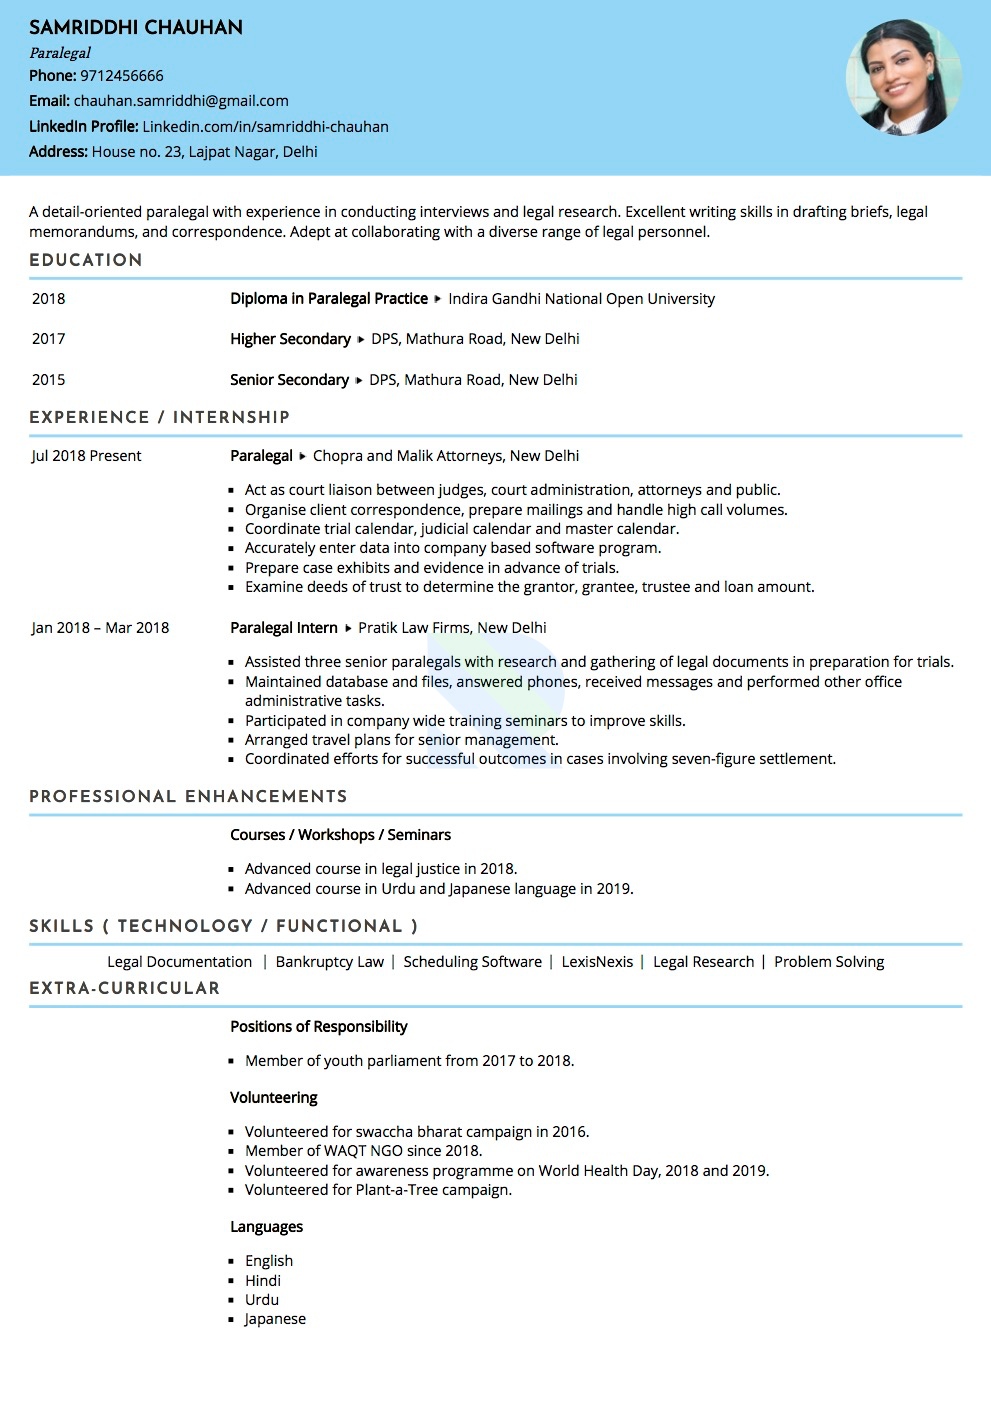 Sample Resume of Paralegal | Free Resume Templates & Samples on Resumod.co